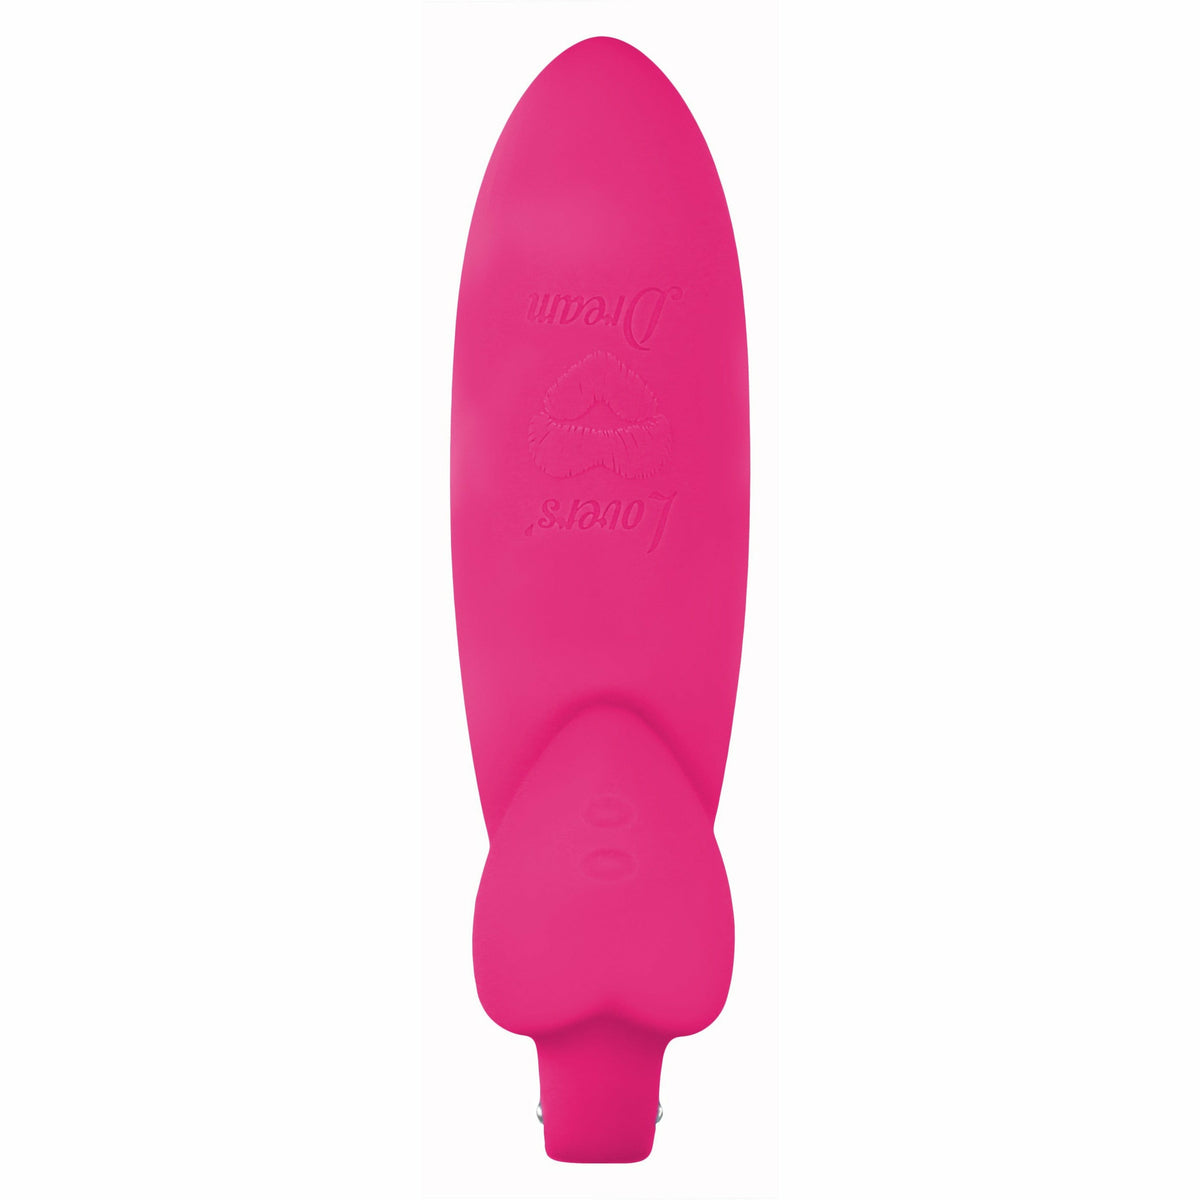 Lover&#39;s Dream Couples Vibrator - Pink